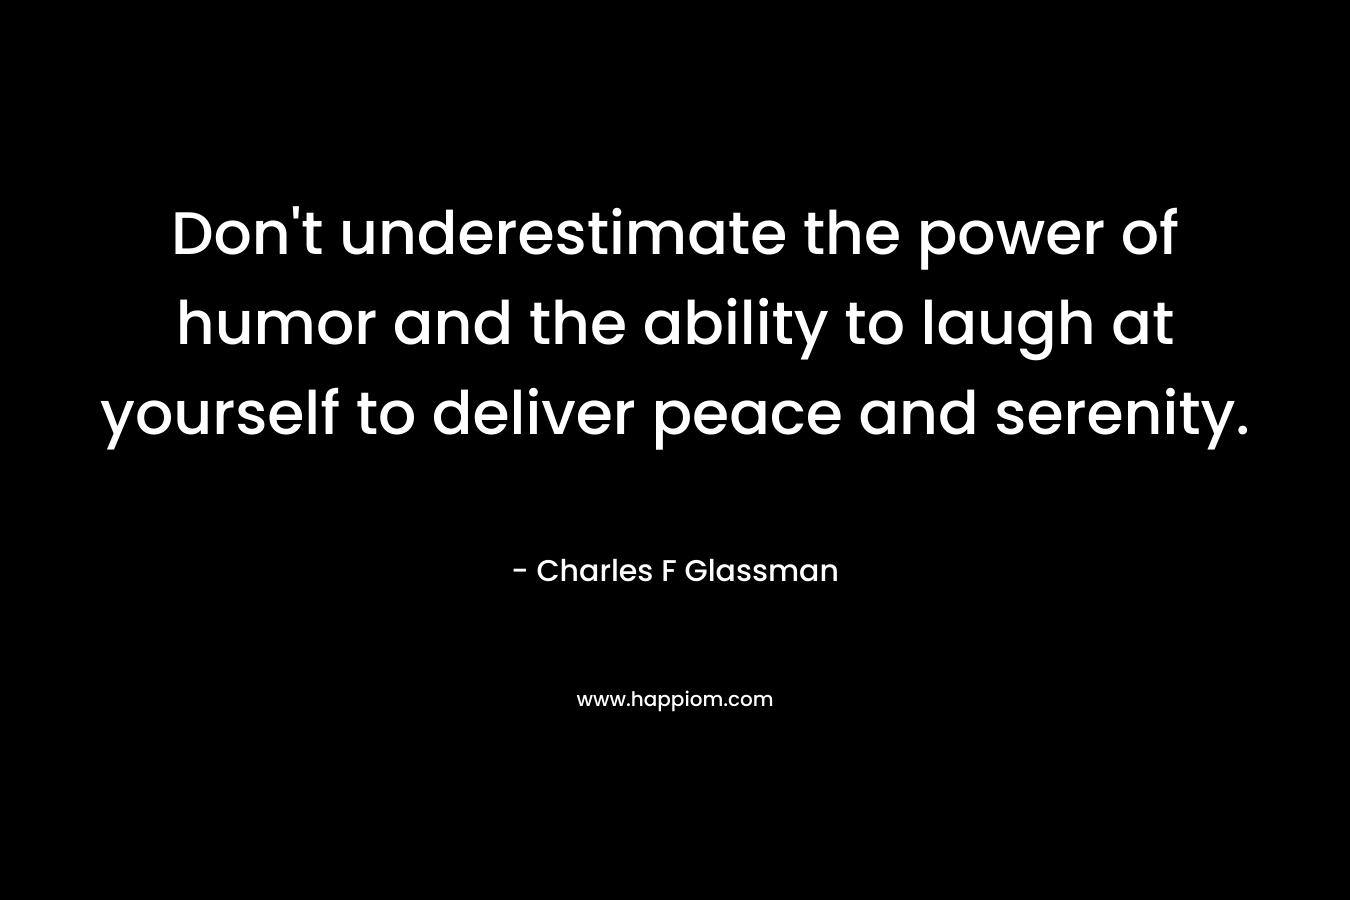 Don't underestimate the power of humor and the ability to laugh at yourself to deliver peace and serenity.